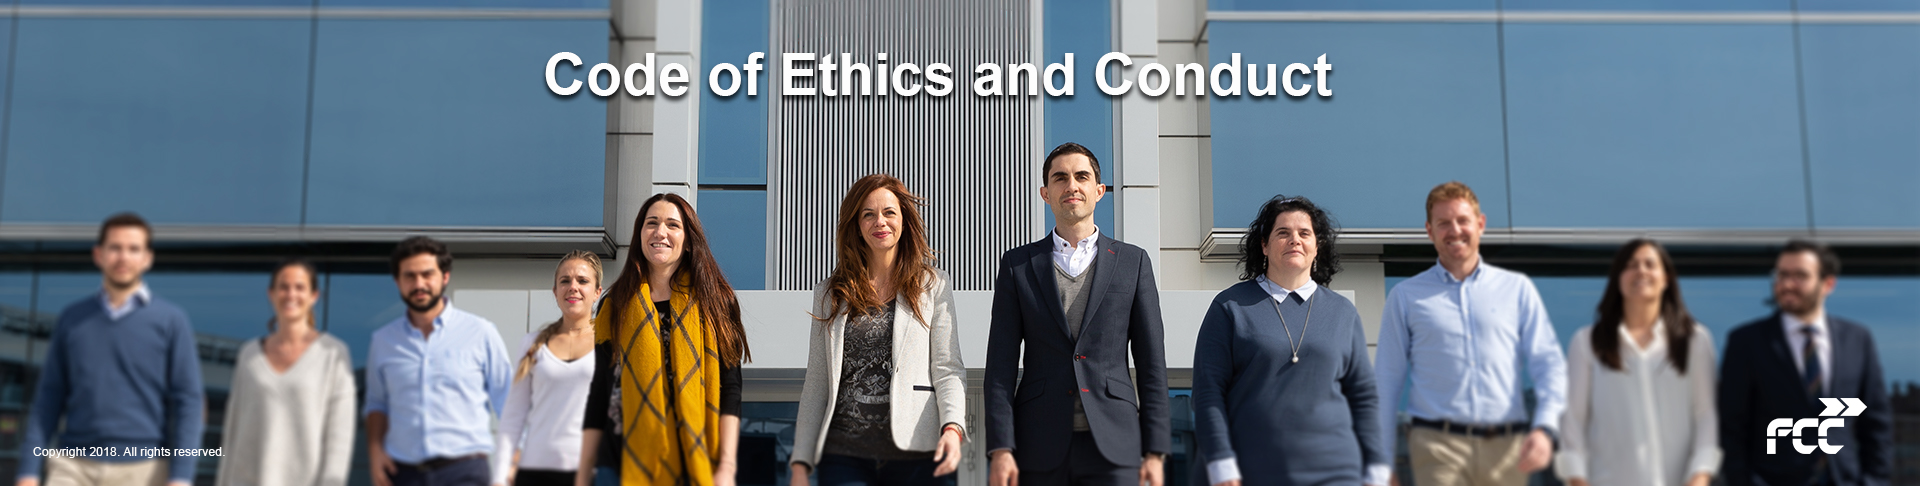 Open Code of Ethics and Conduct PDF (Open in new window)